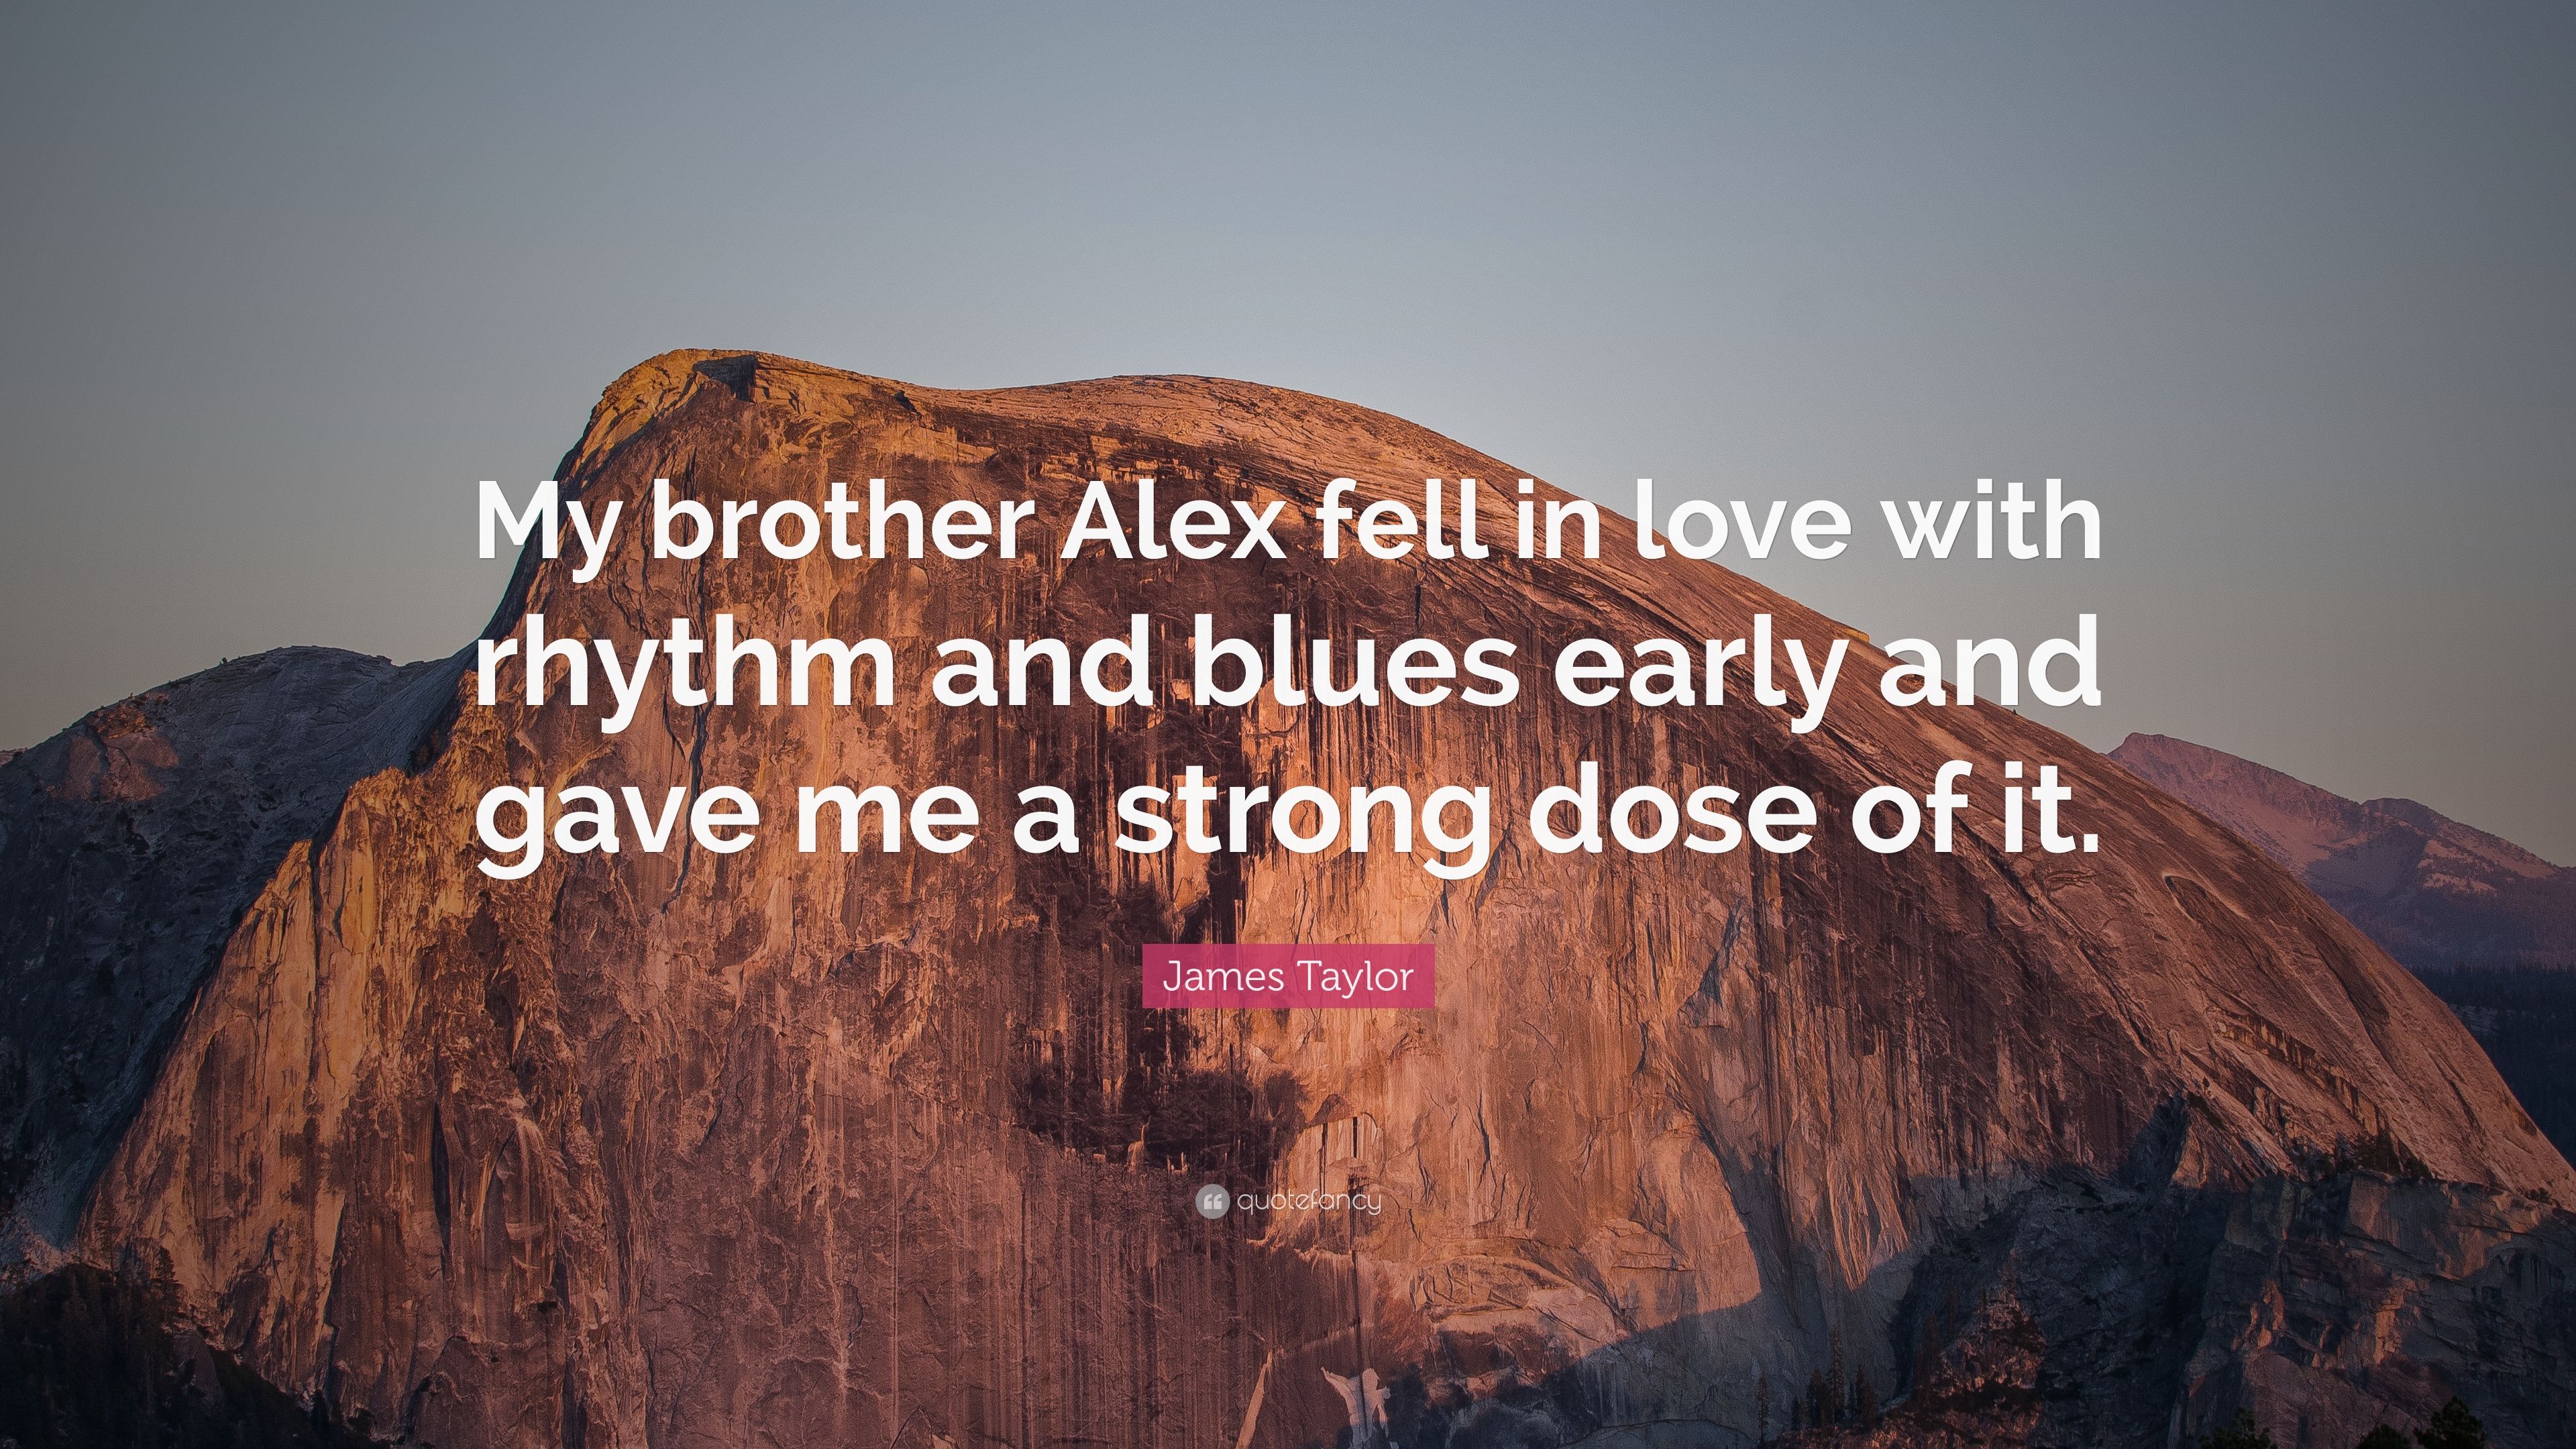 James Taylor Quote: “My brother Alex fell in love with rhythm